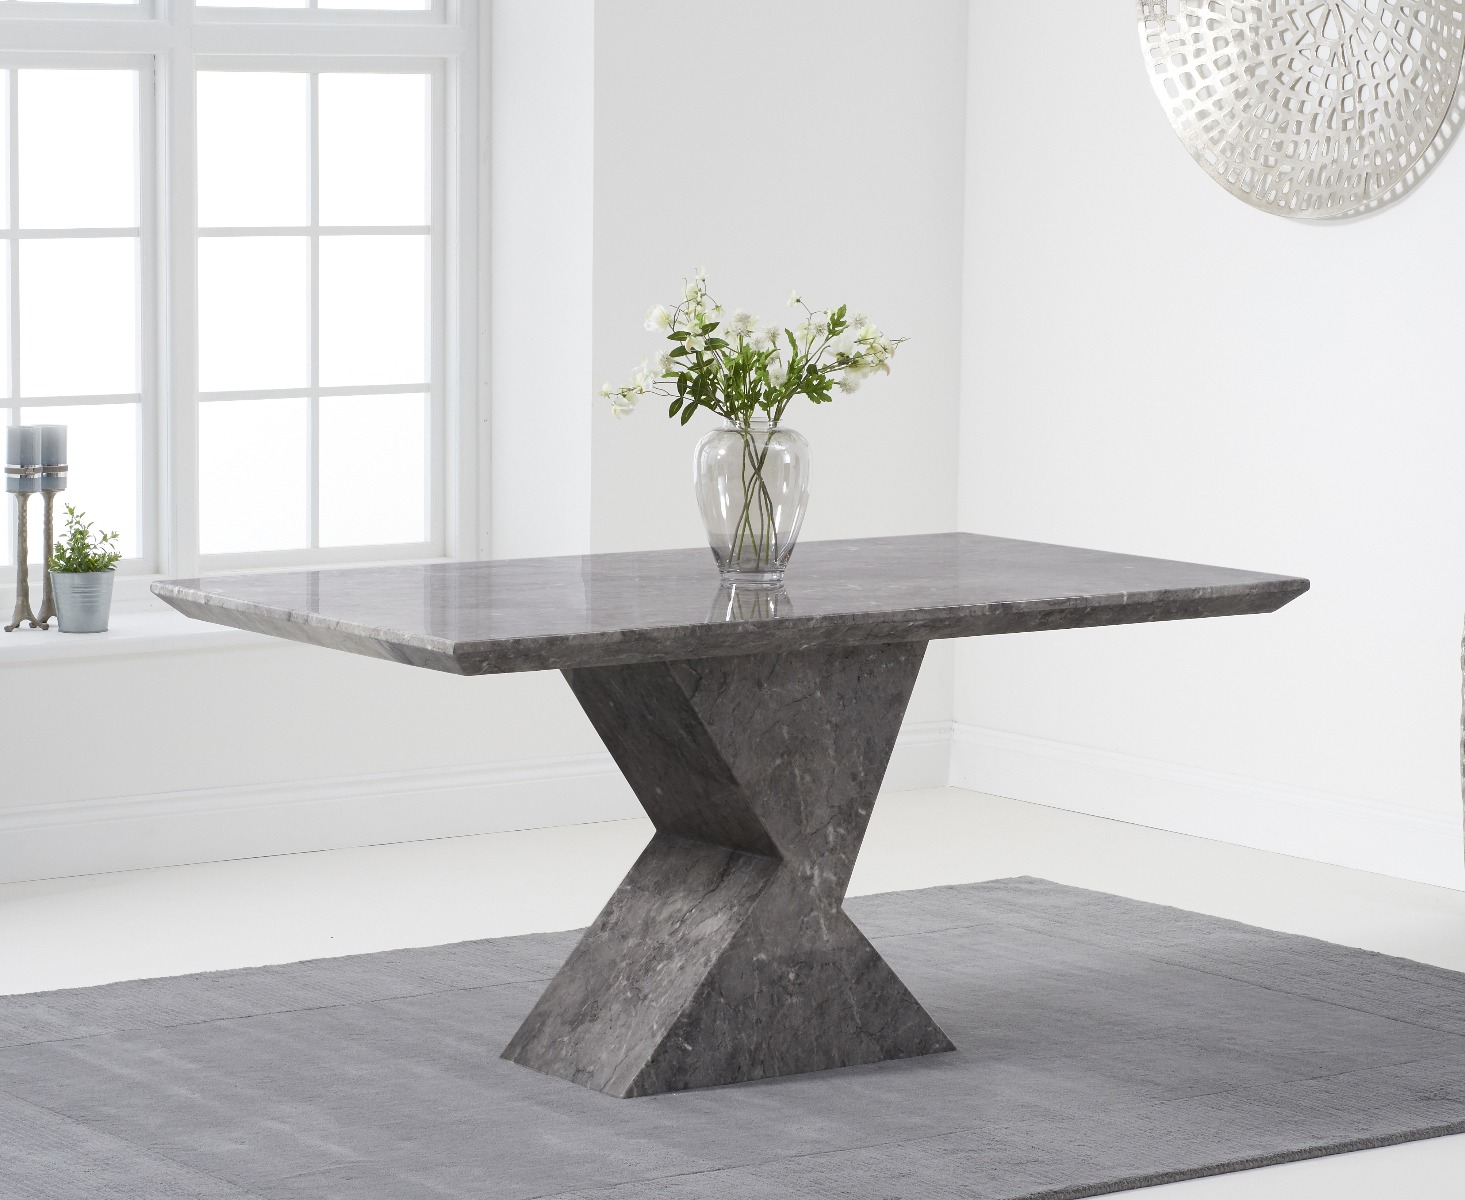 Photo 3 of Aaron 160cm grey marble dining table with 6 grey aldo chairs